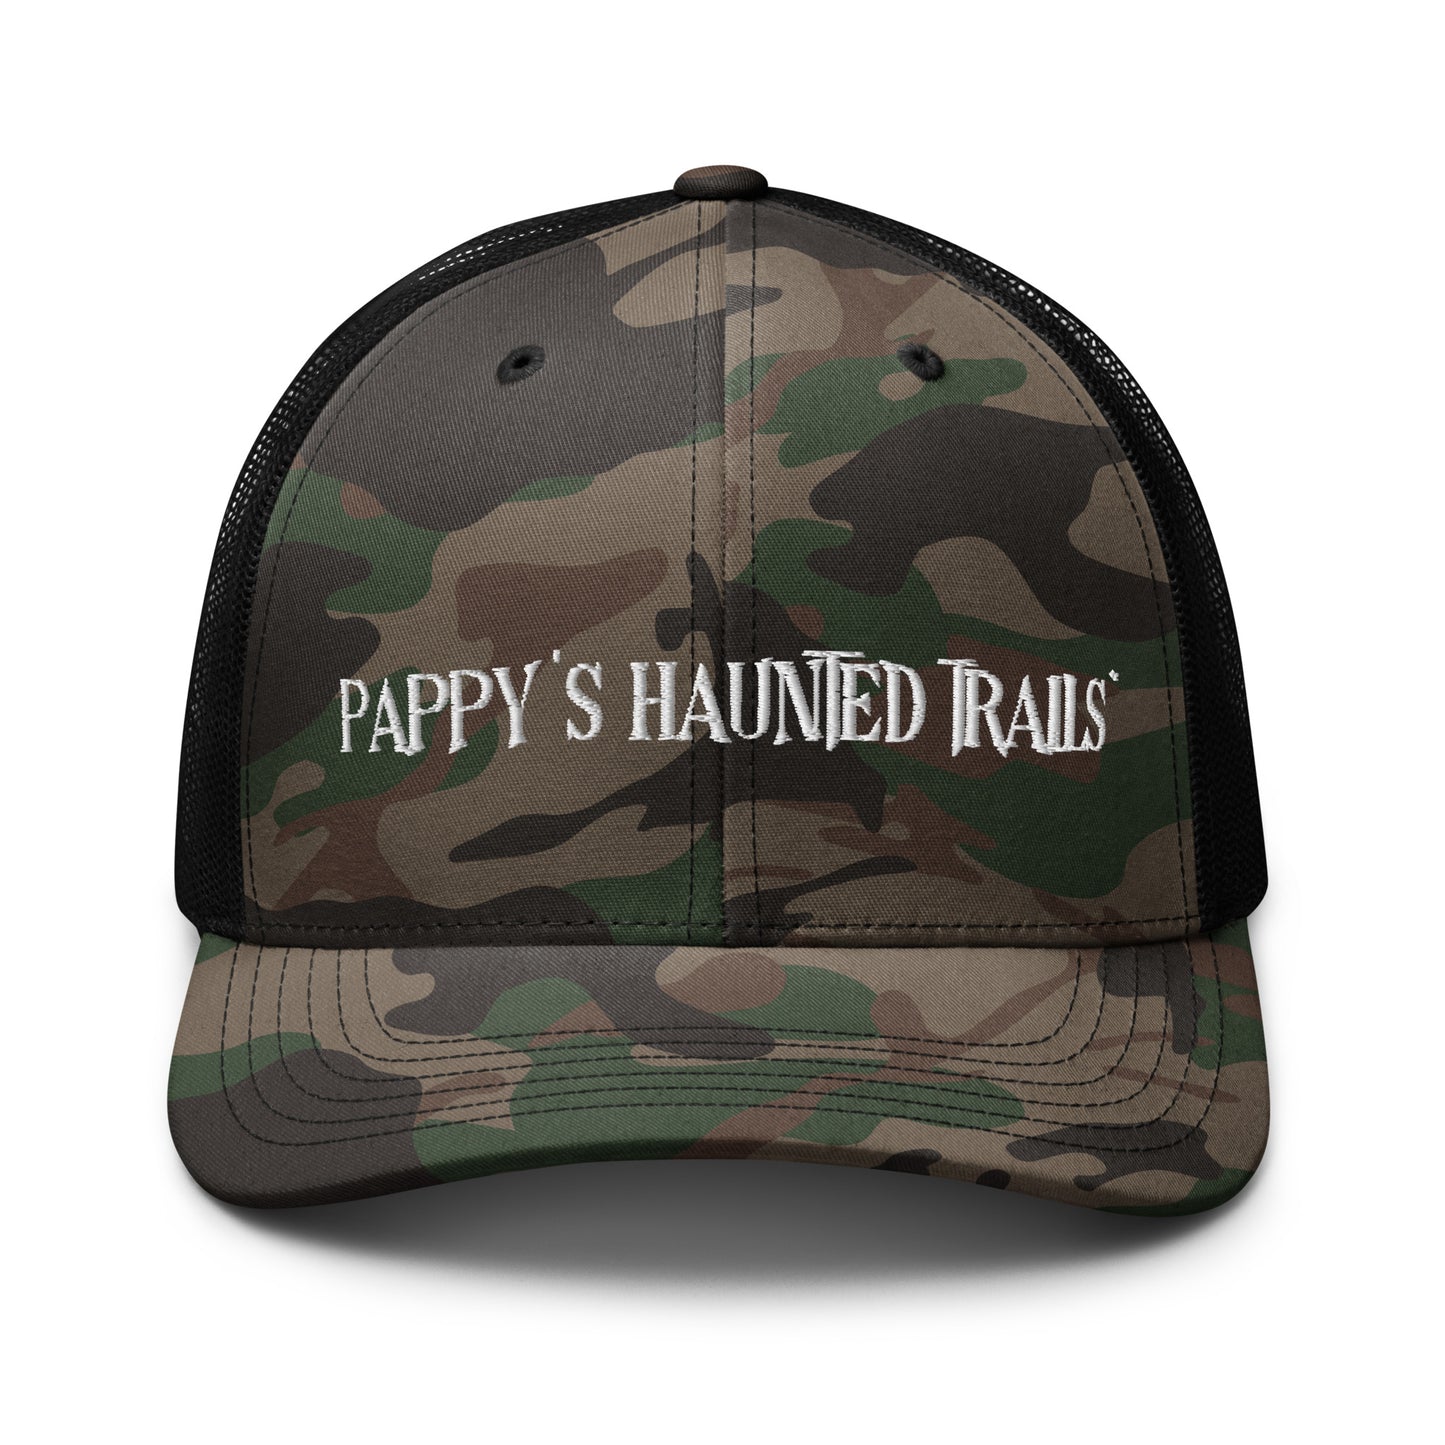 Pappy's Haunted Trails Camouflage trucker hat